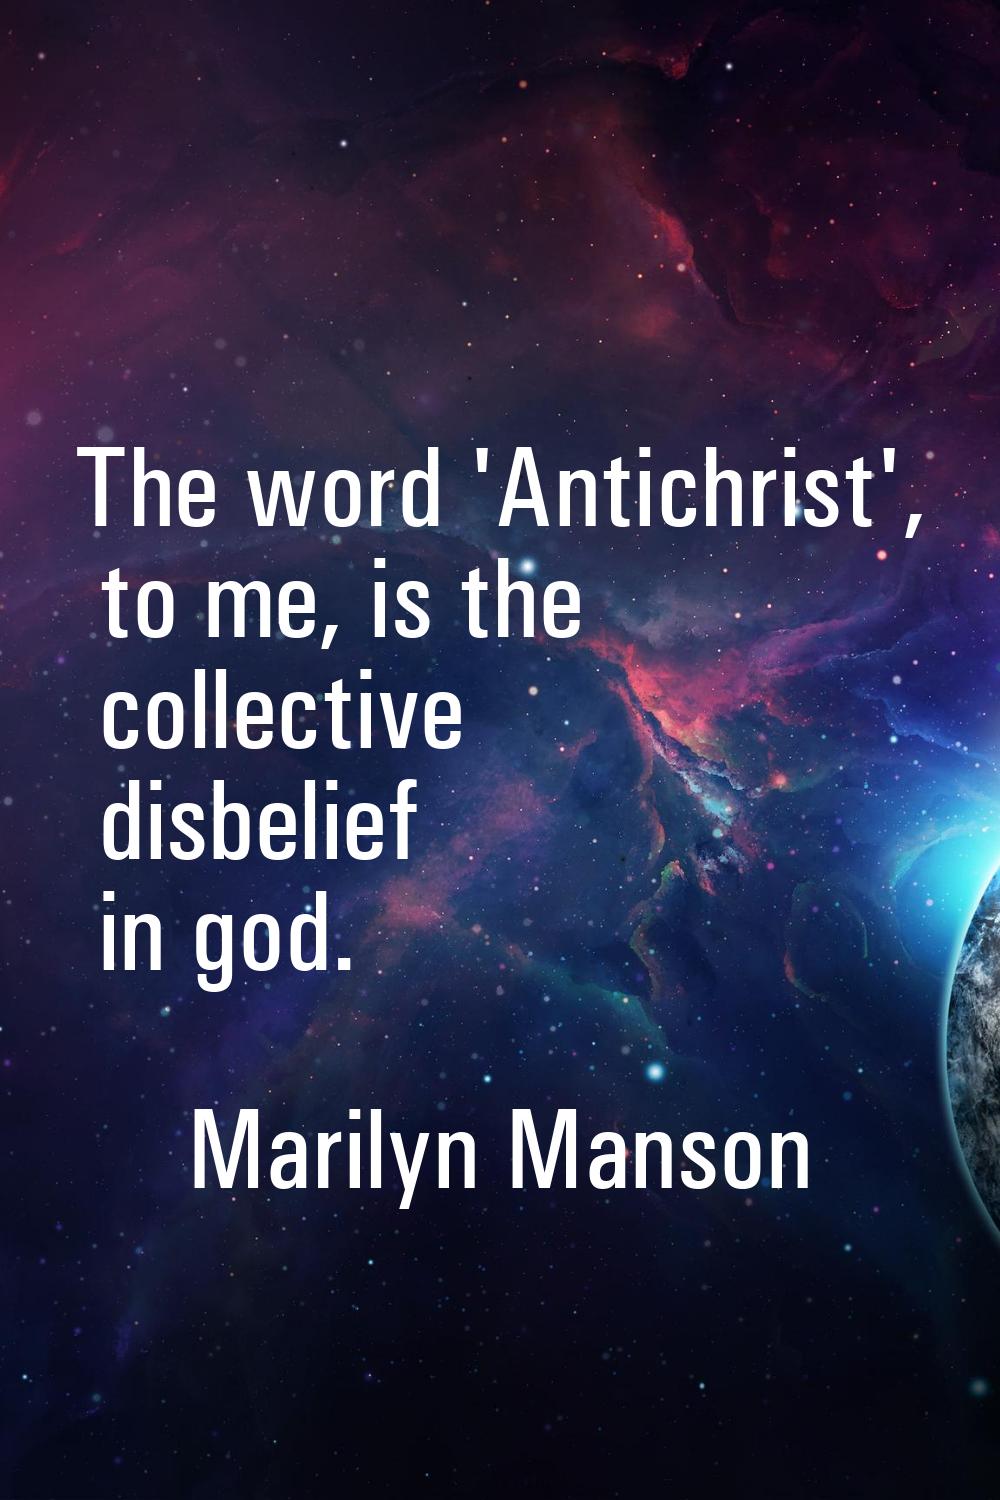 The word 'Antichrist', to me, is the collective disbelief in god.